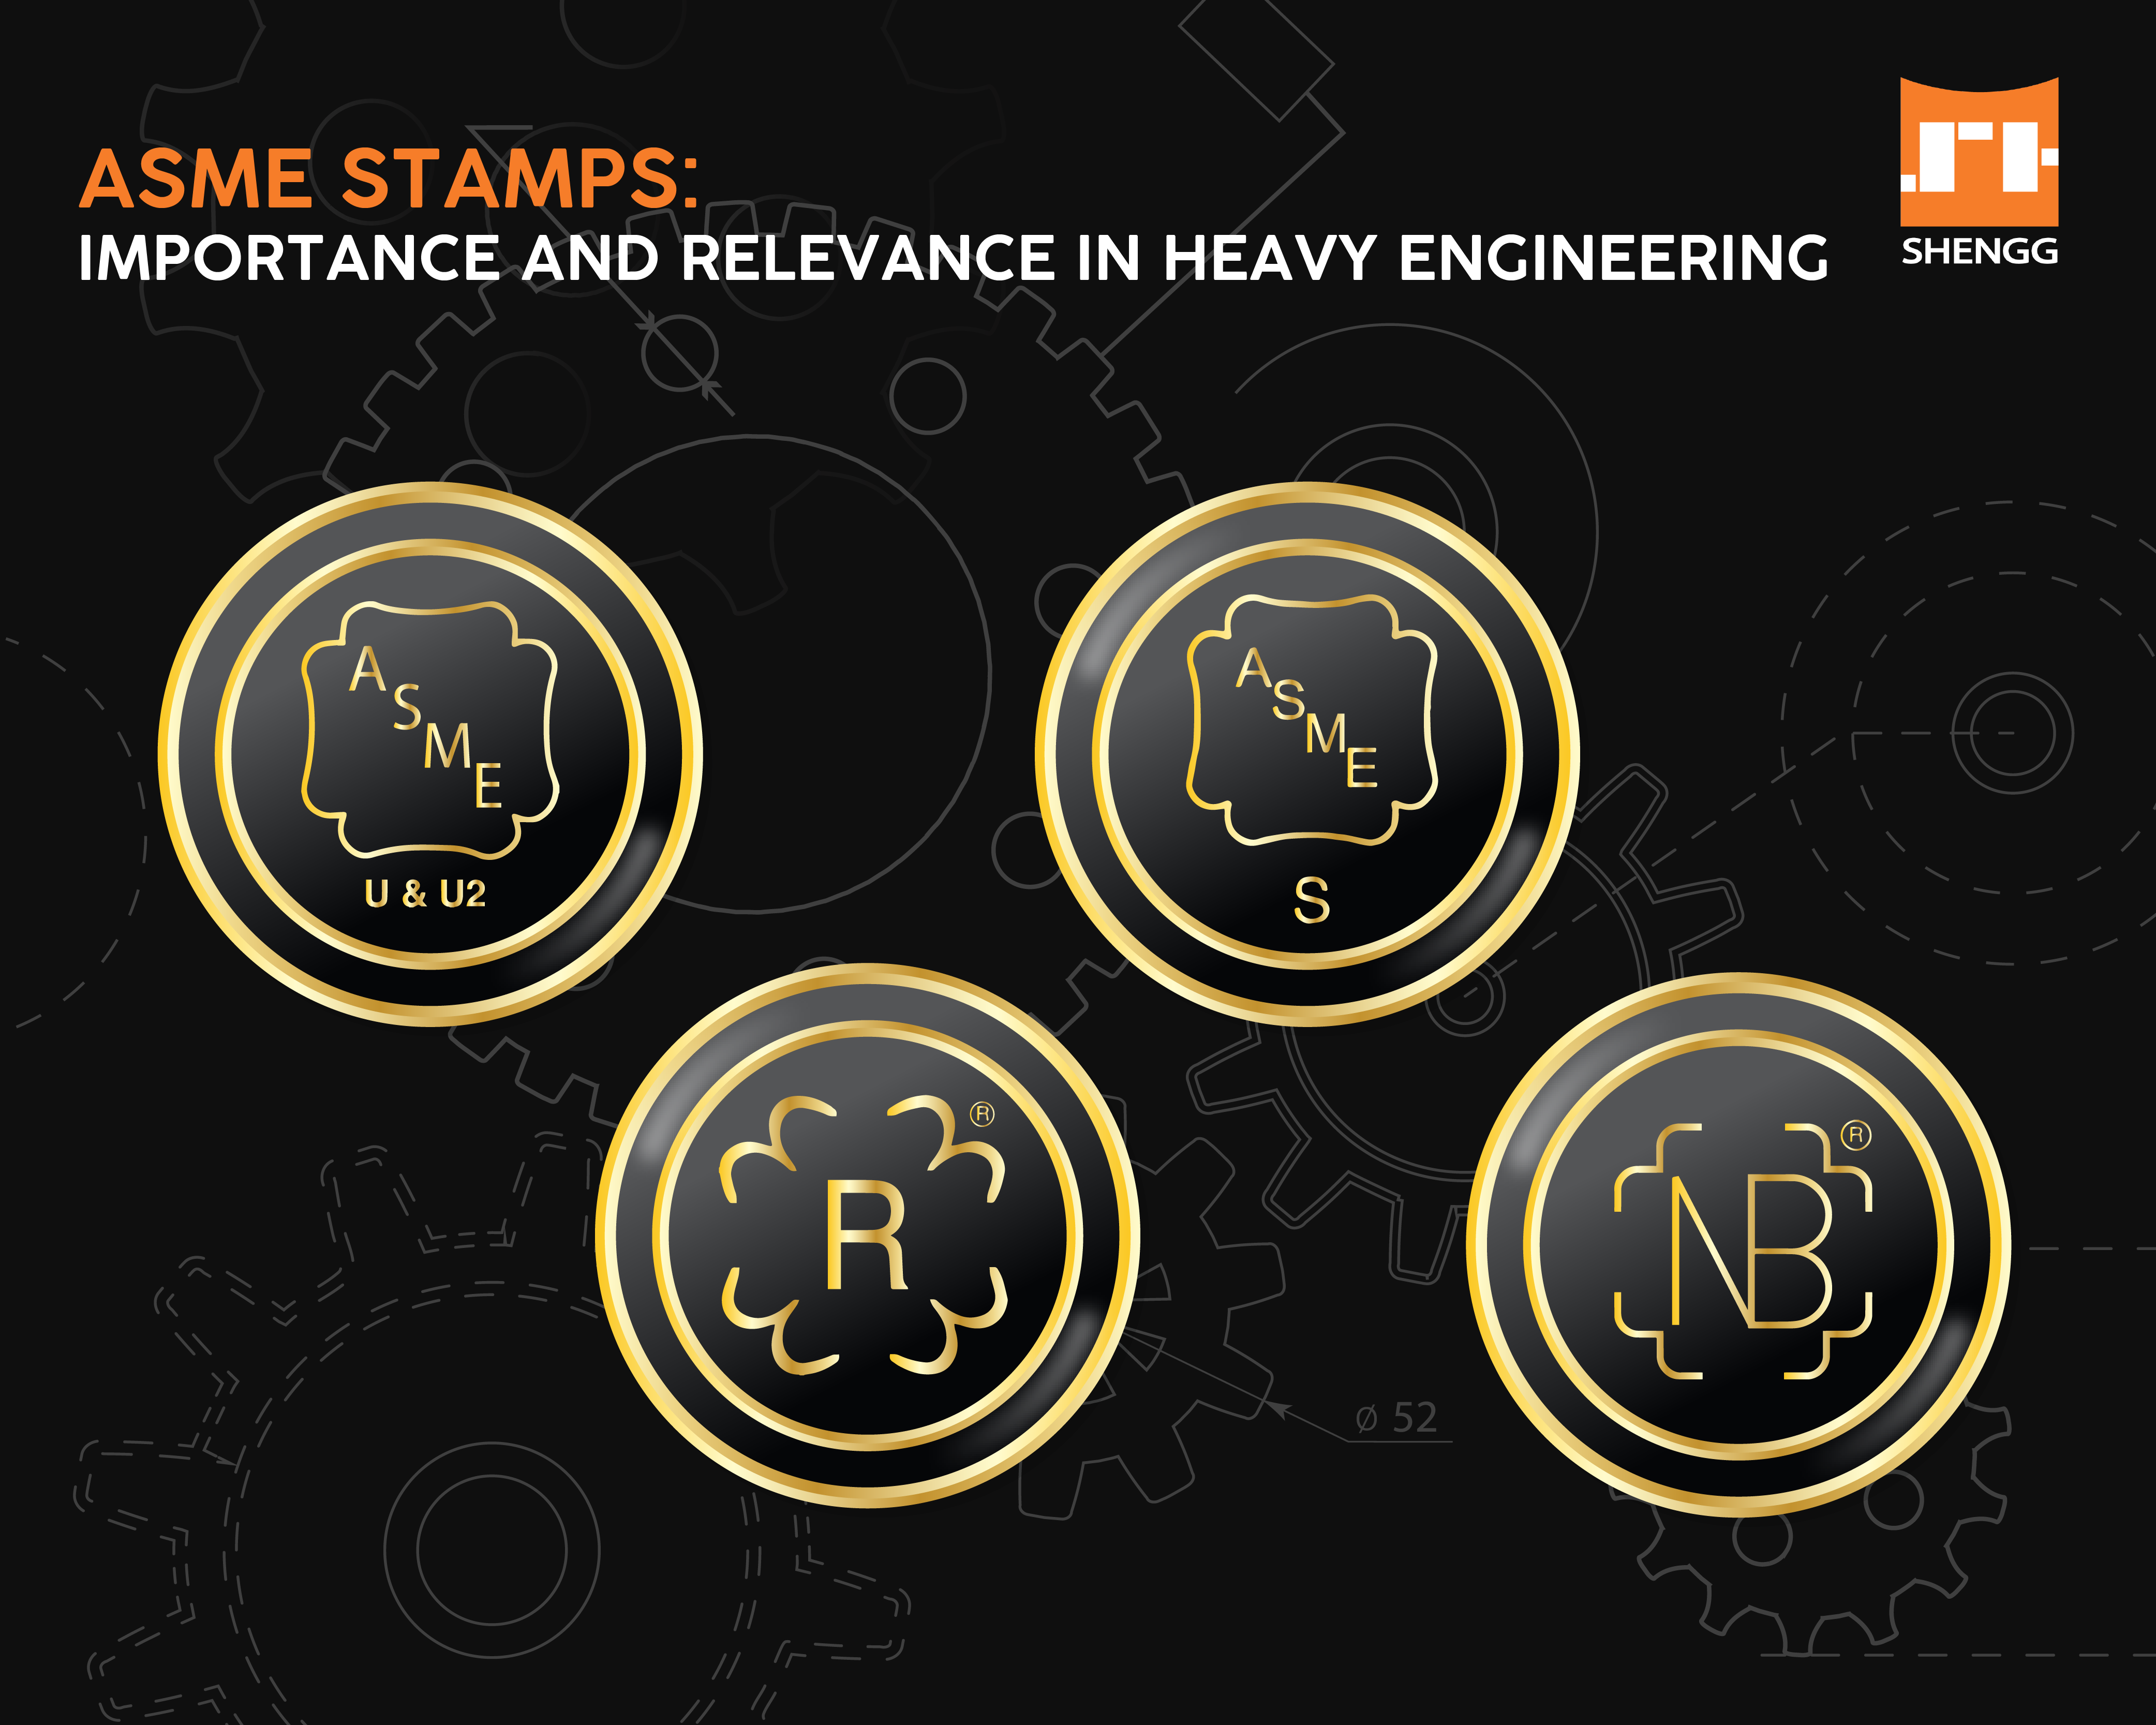 ASME Stamps: Importance and Relevance in Heavy Engineering